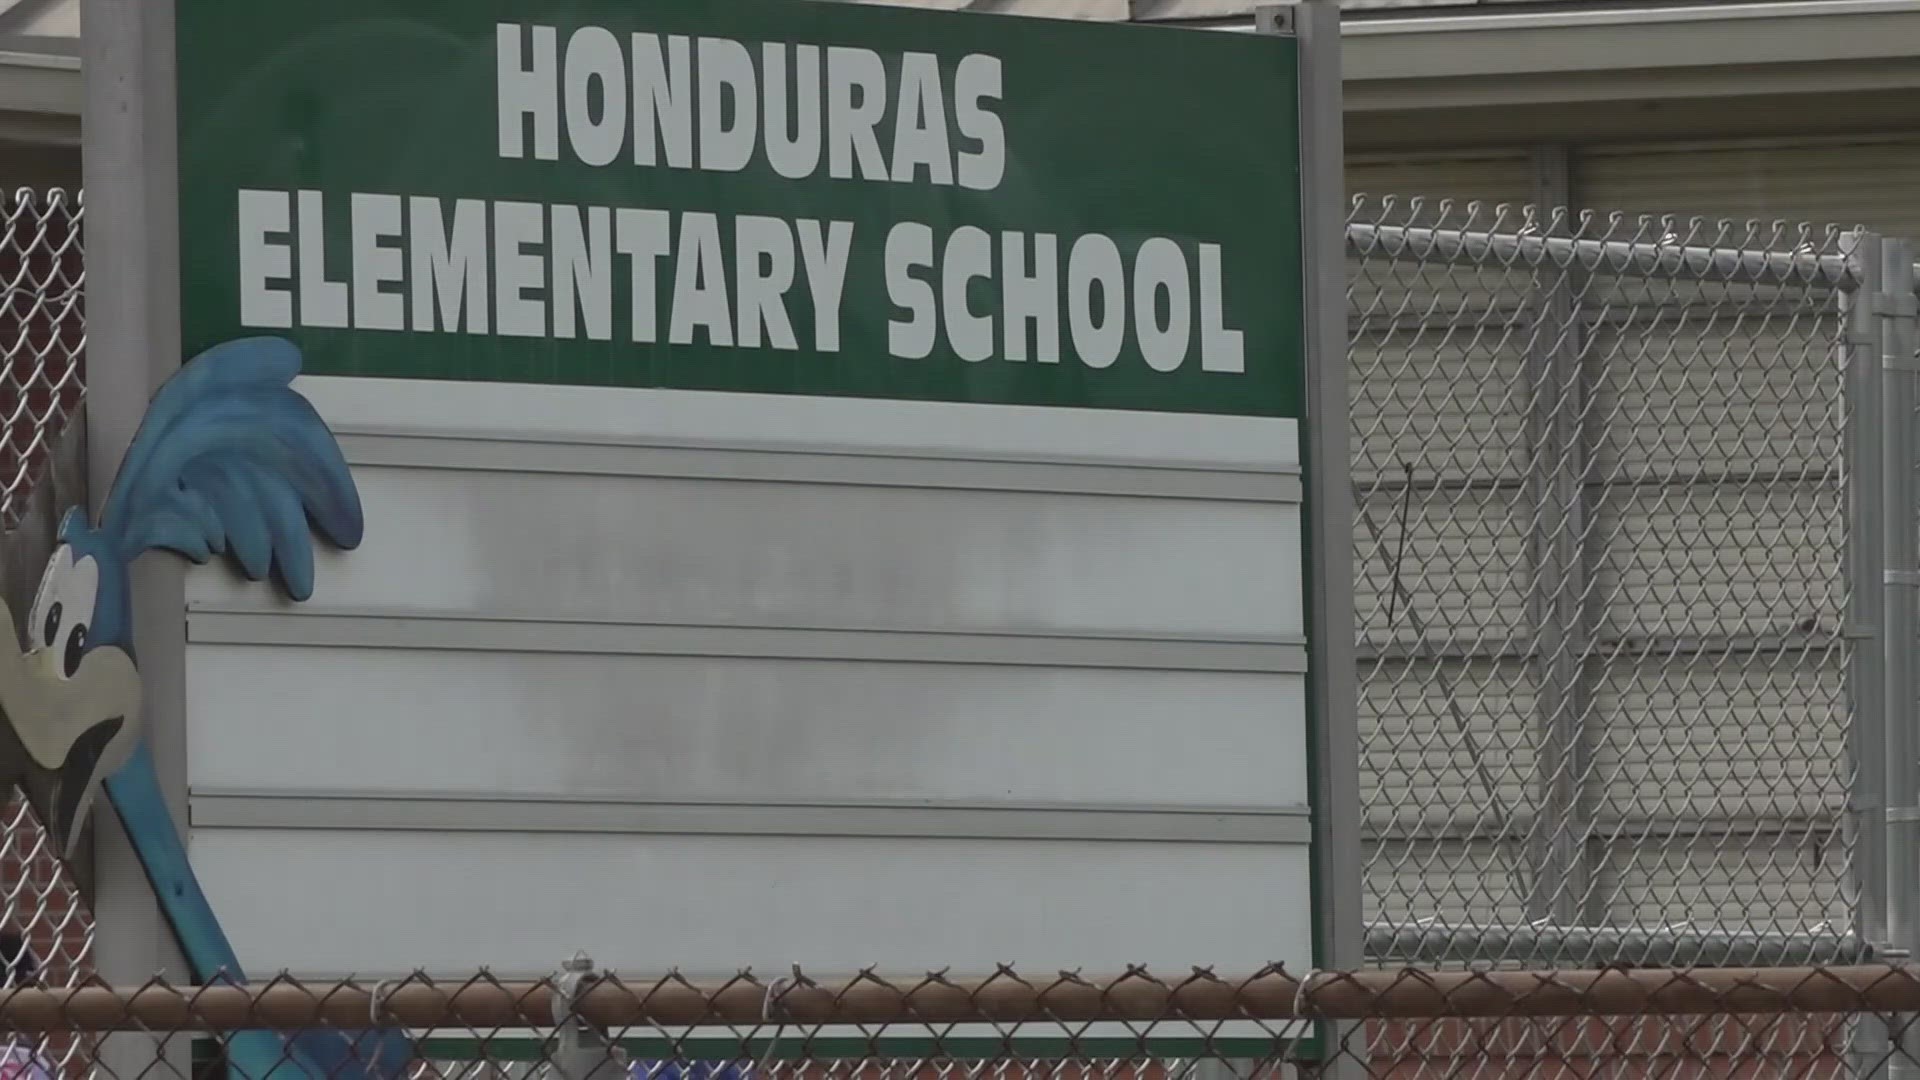 Honduras, Bayou Black, and Gibson will close at the end of the school year, and students, teachers, and staff will move to other schools.